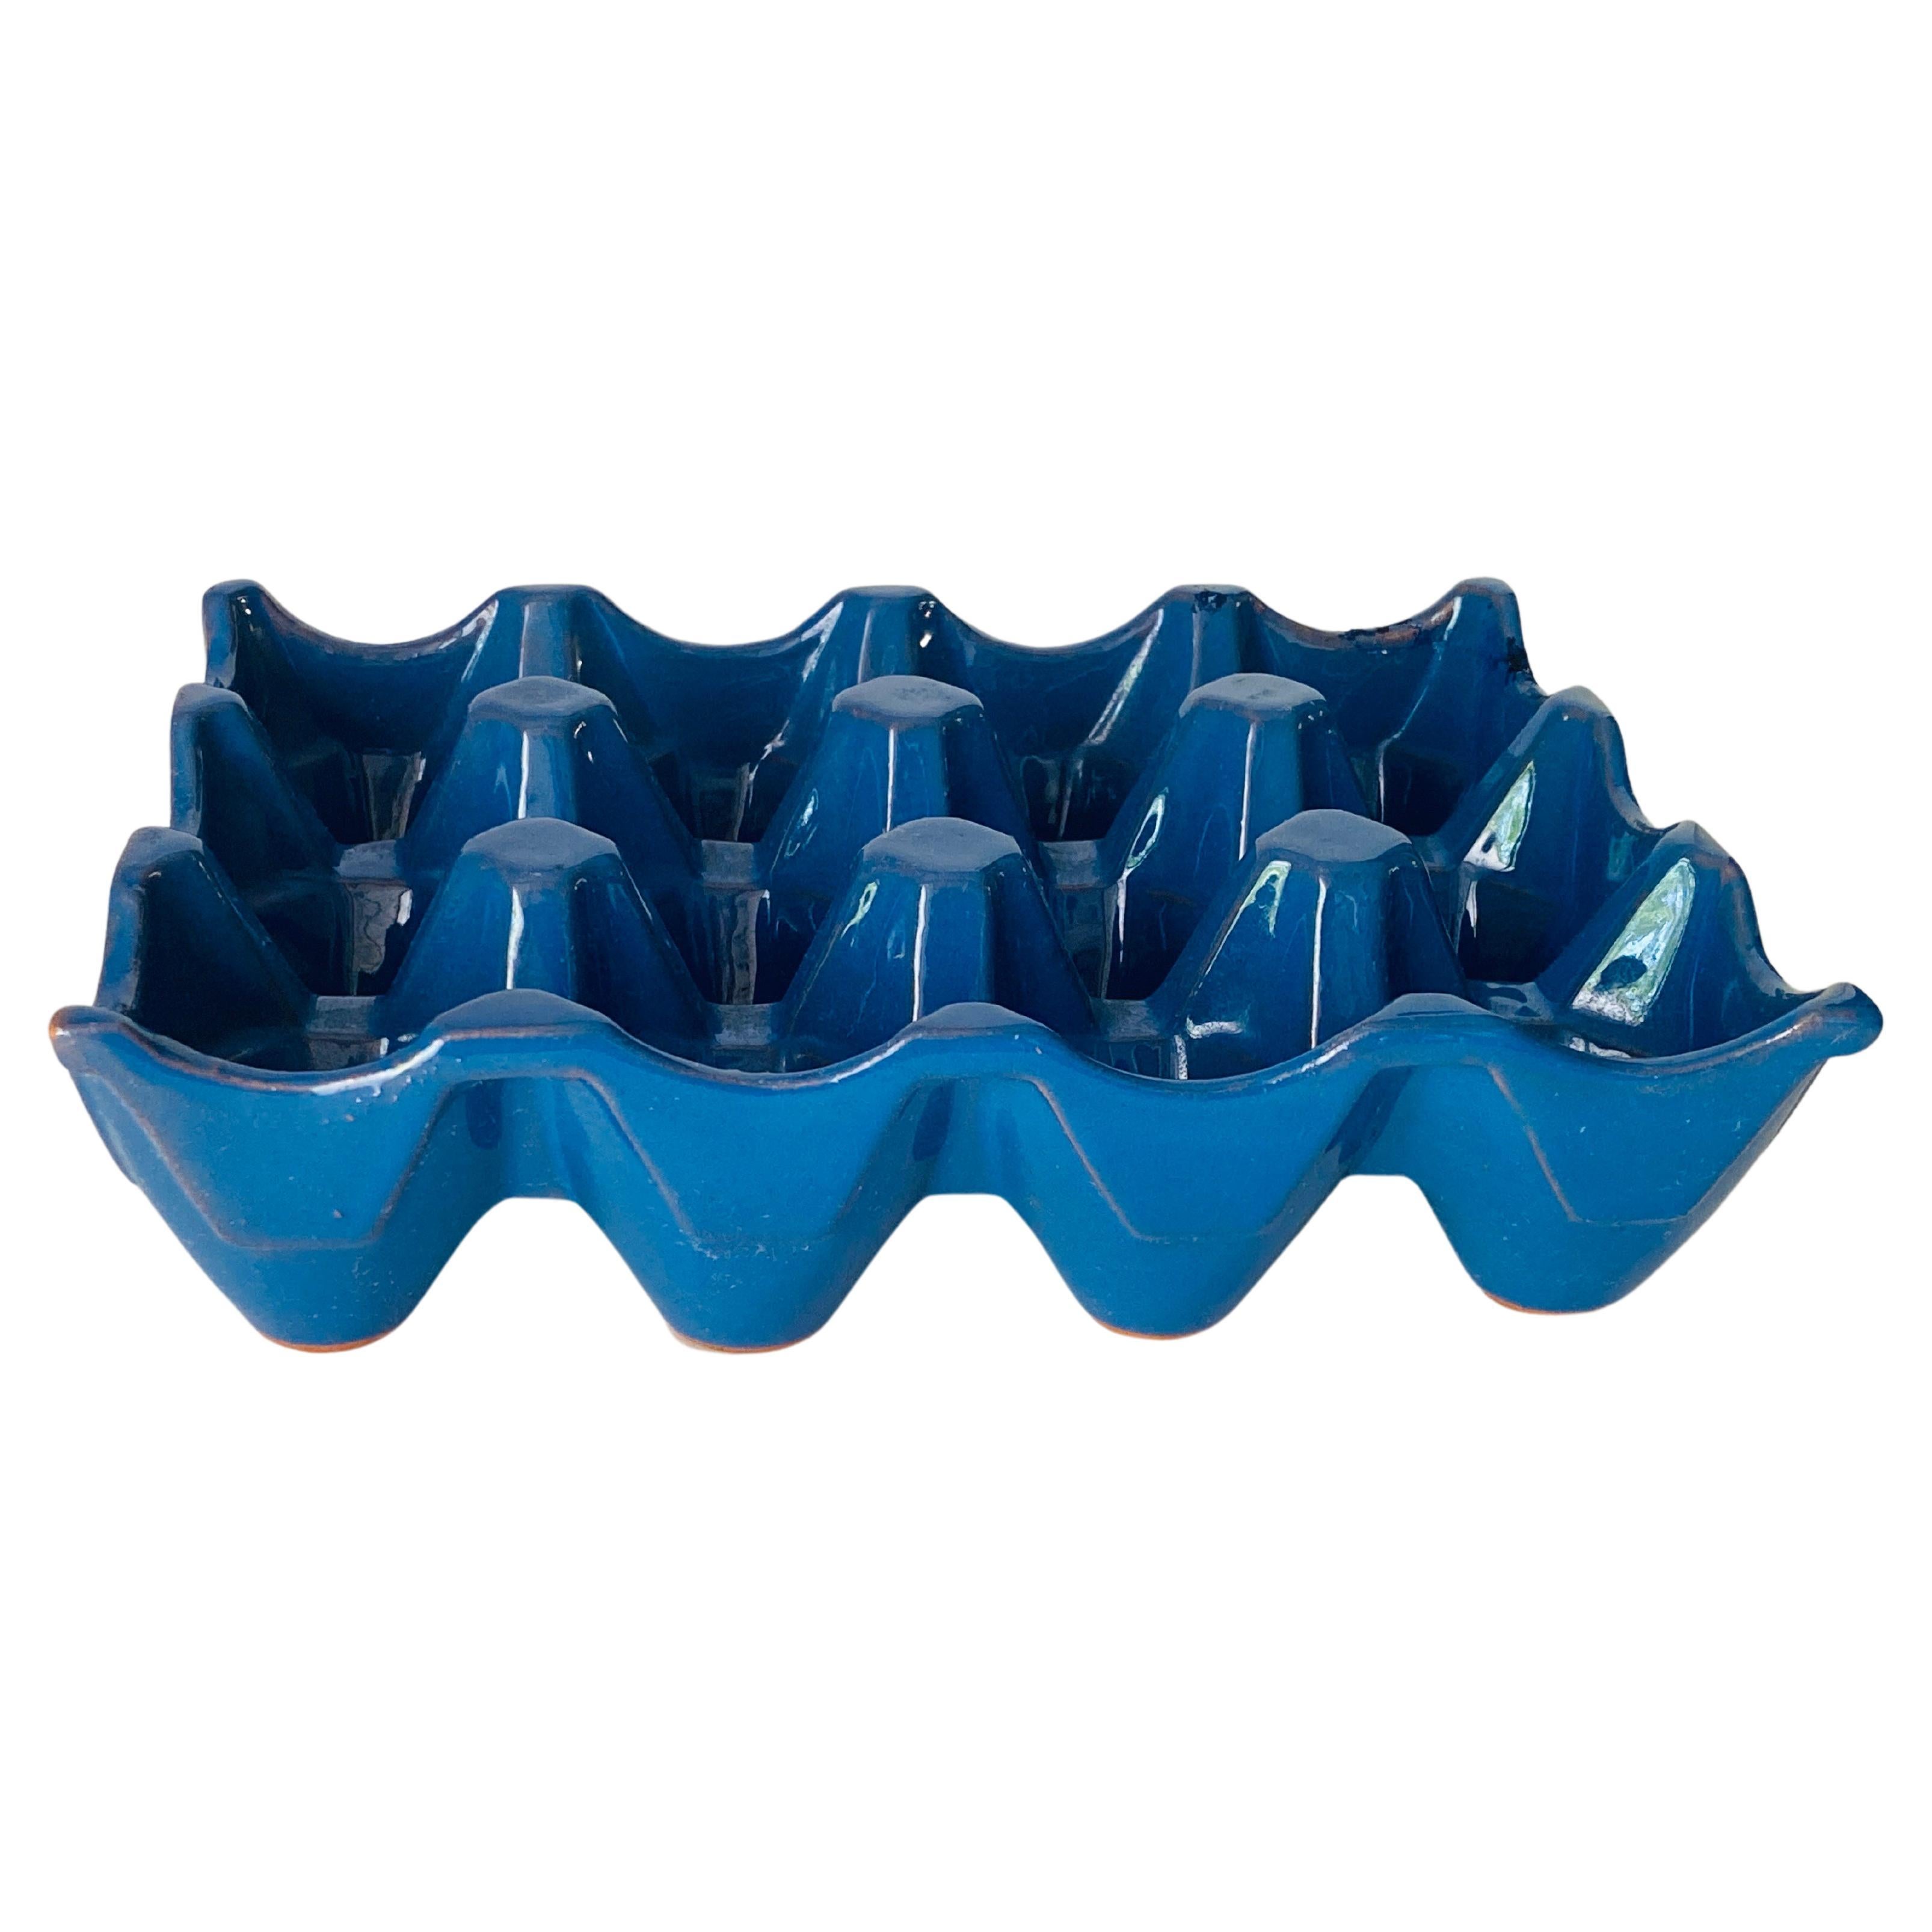  Large Ceramic Egg Holder 12 Eggs Blue Color, Italy, circa 1970 For Sale